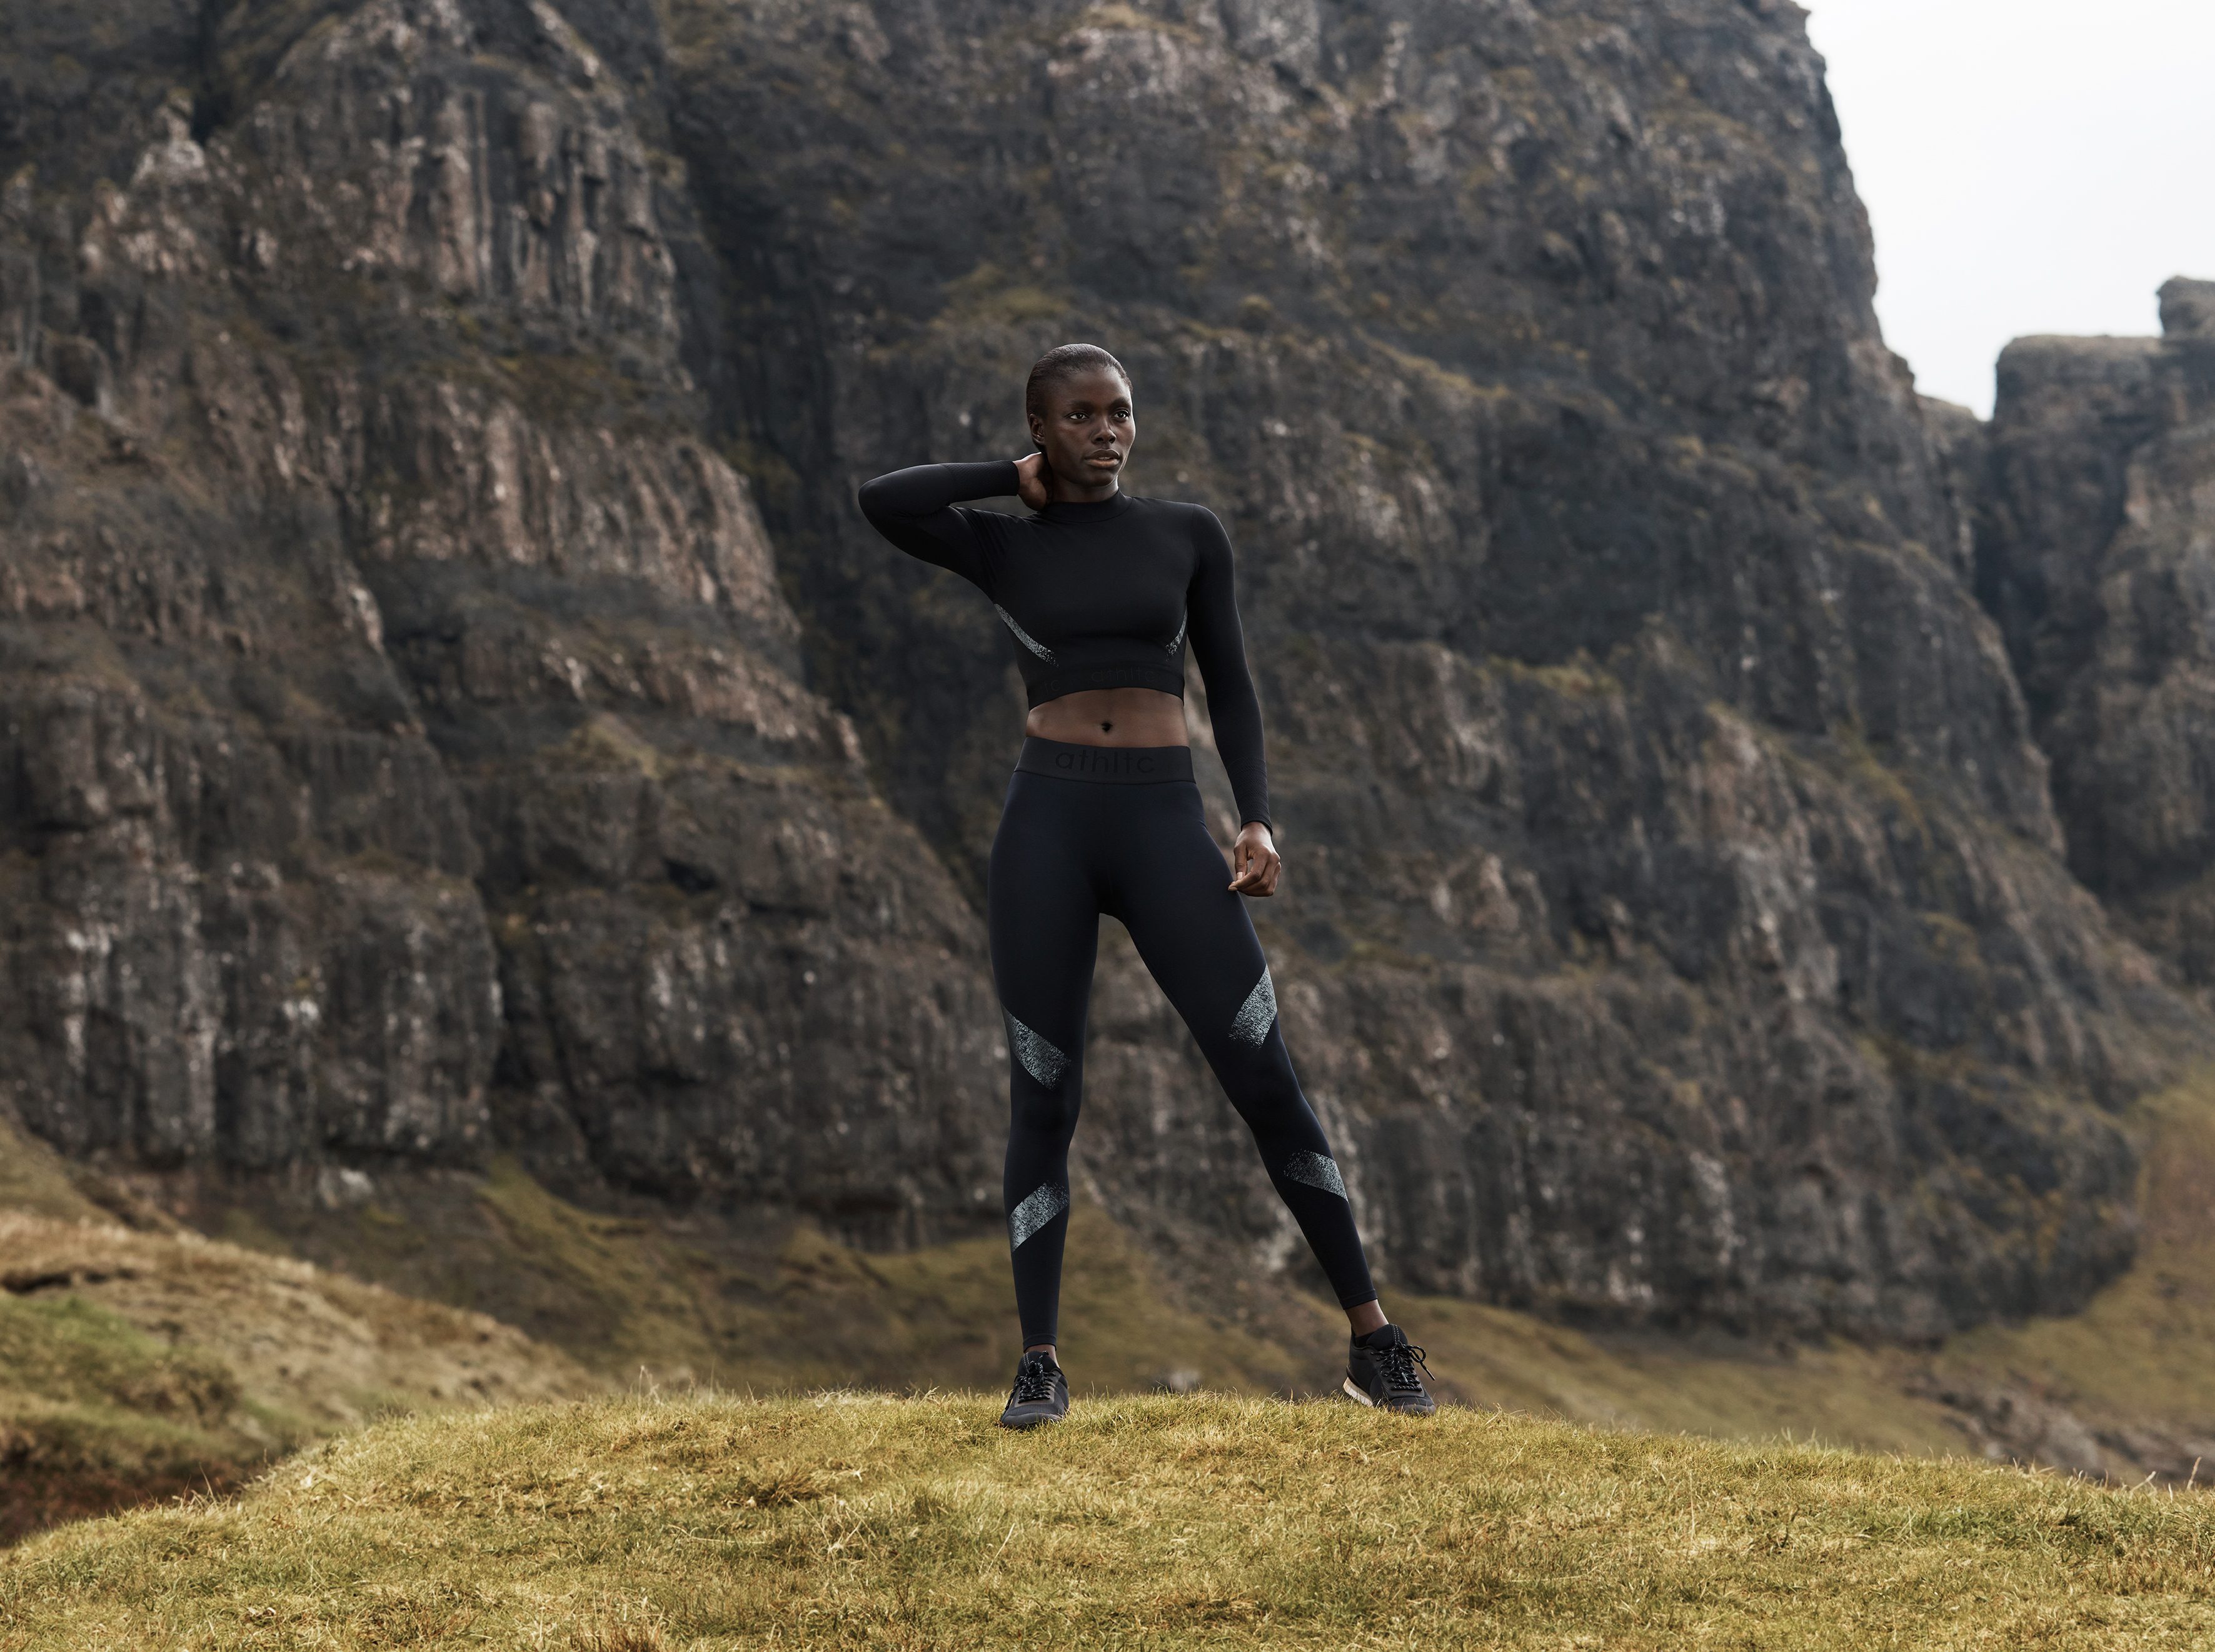 H&M's Launching a New Fitness Line, H&M Sport